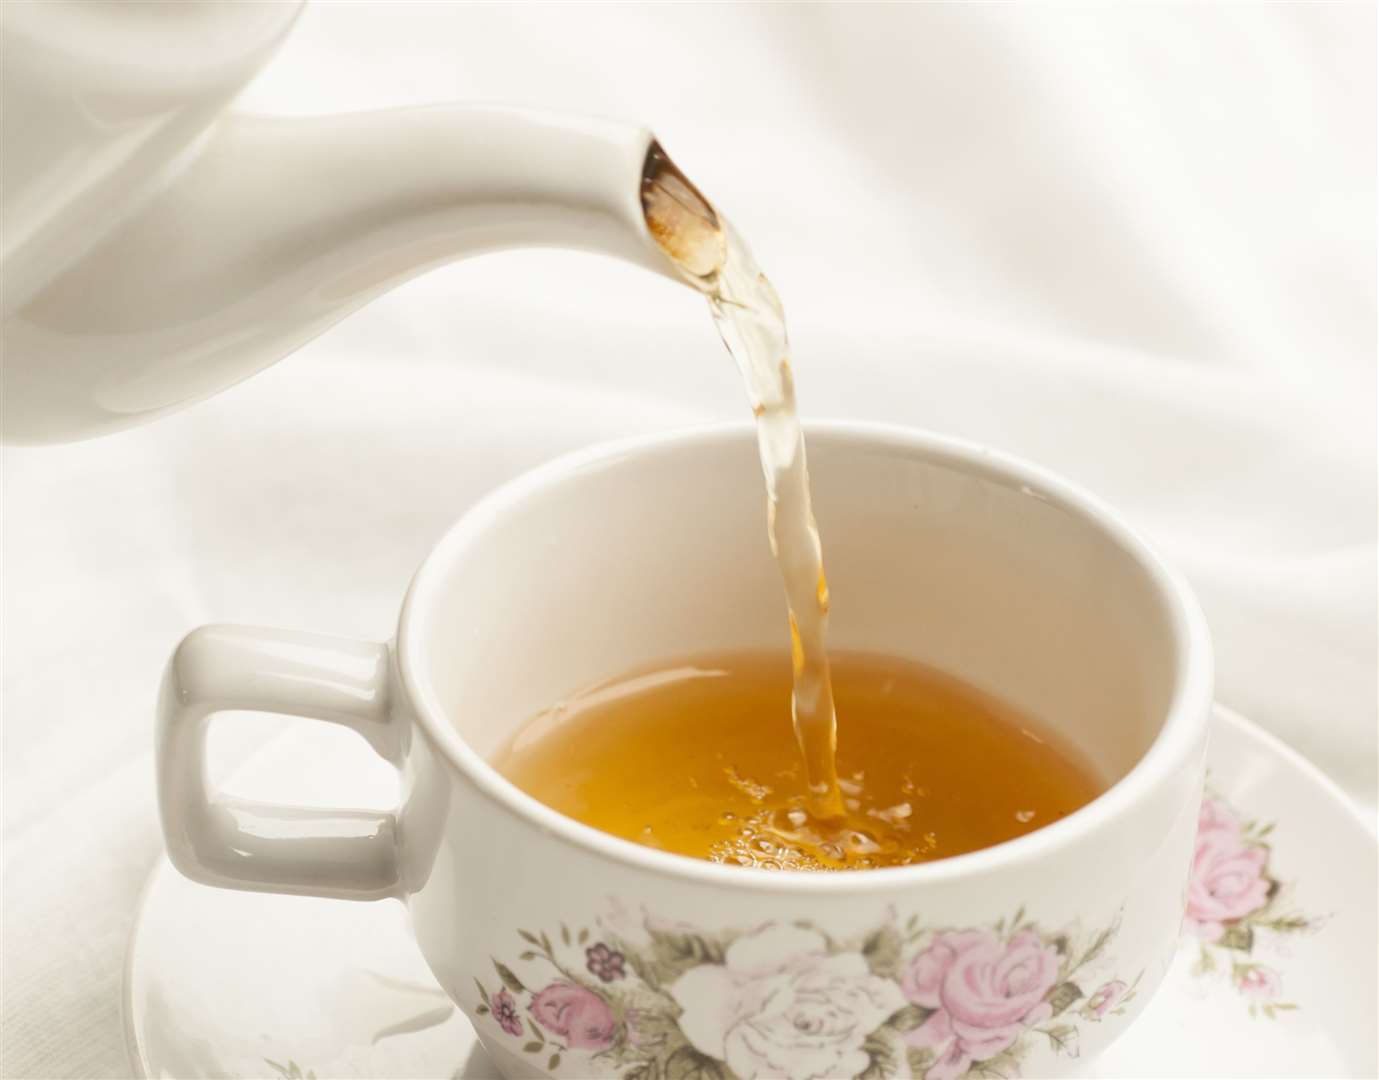 All our columnist wanted was a mug of English tea Picture: Thinkstock